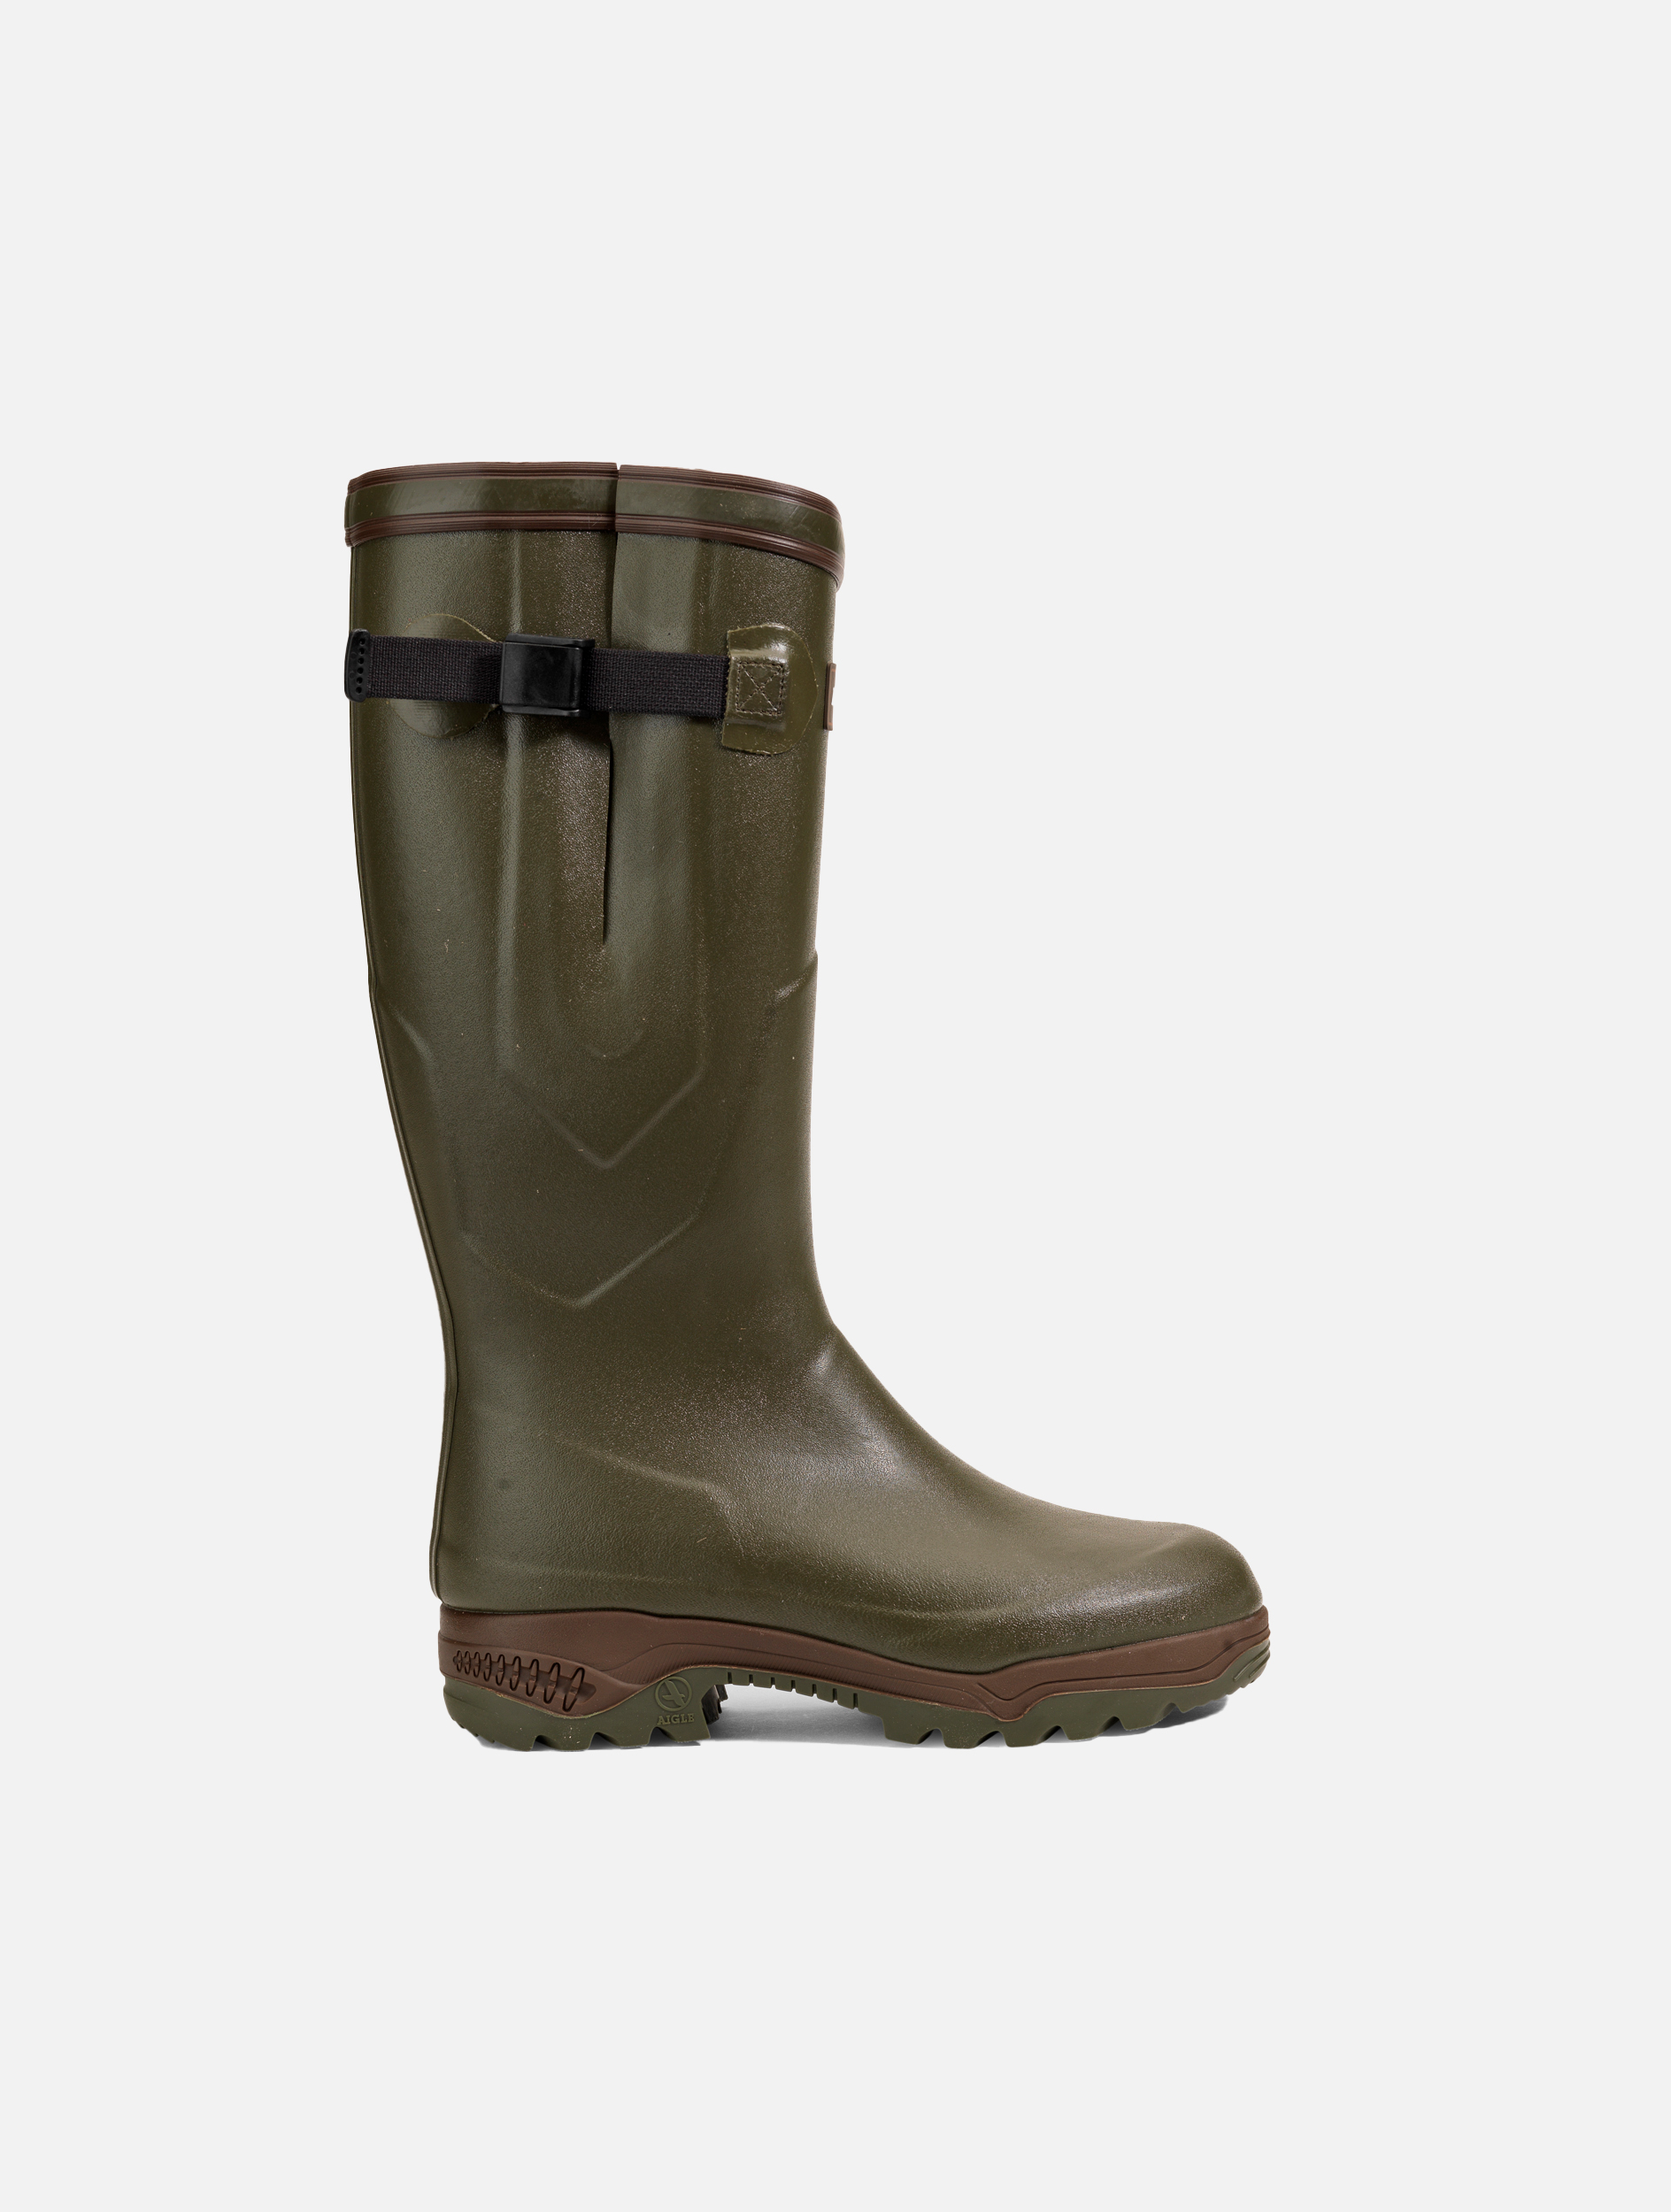 - Anti-fatigue boots for cold weather, in France Kaki Parcours® 2 isomen | AIGLE